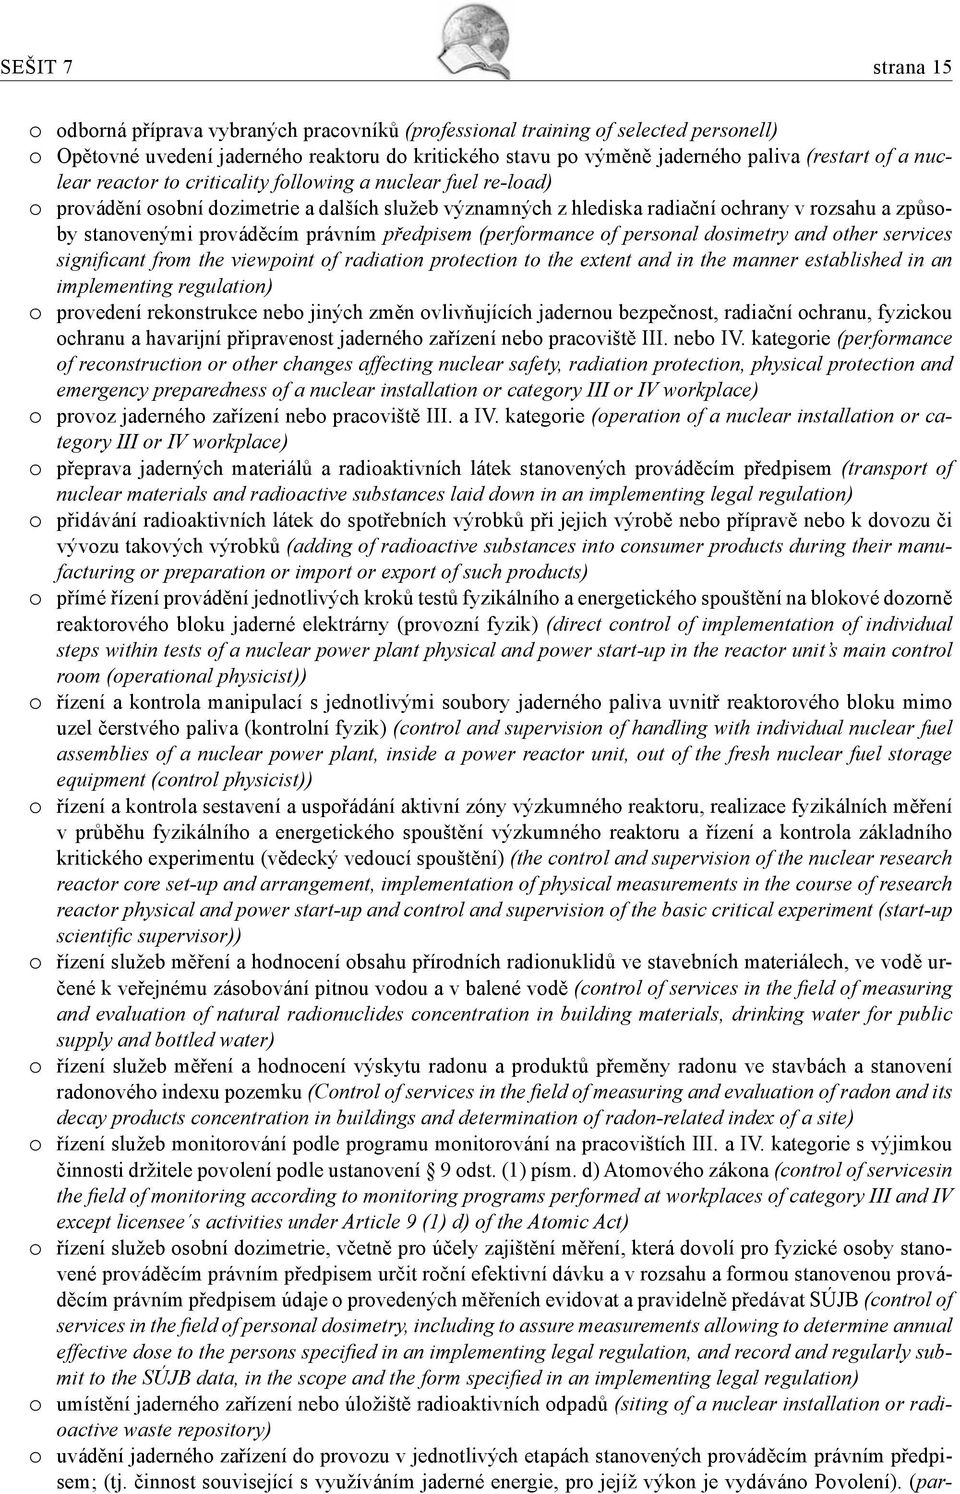 právním předpisem (performance of personal dosimetry and other services signifi cant from the viewpoint of radiation protection to the extent and in the manner established in an implementing